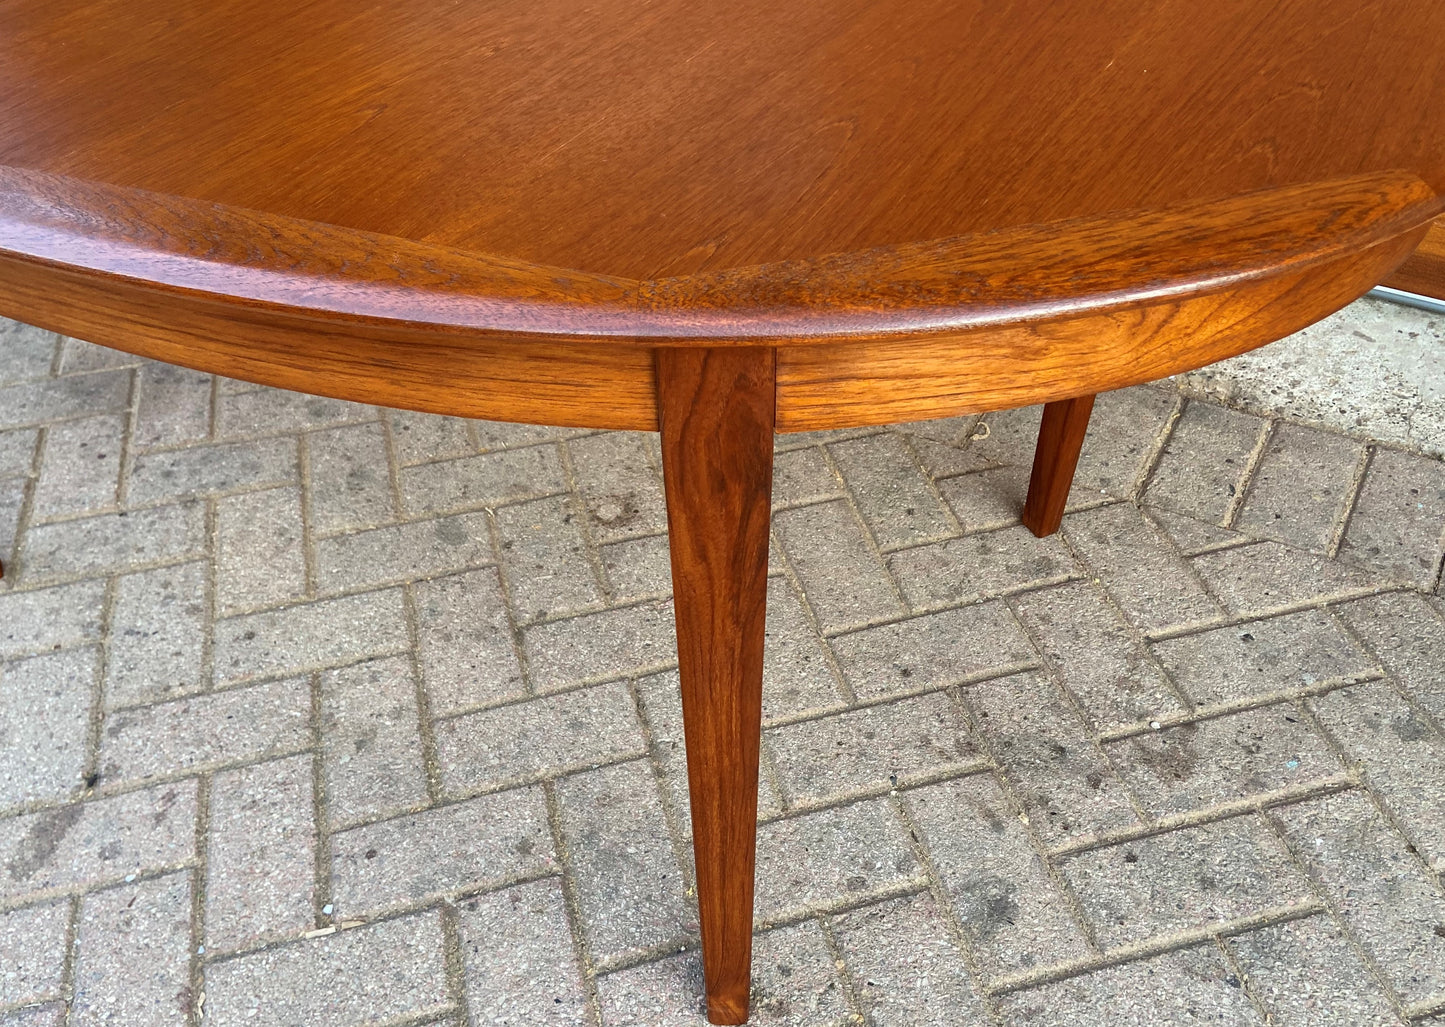 REFINISHED Danish Mid Century Modern Teak Table w 2 Leaves by A.H.Olsen, 64"-103"